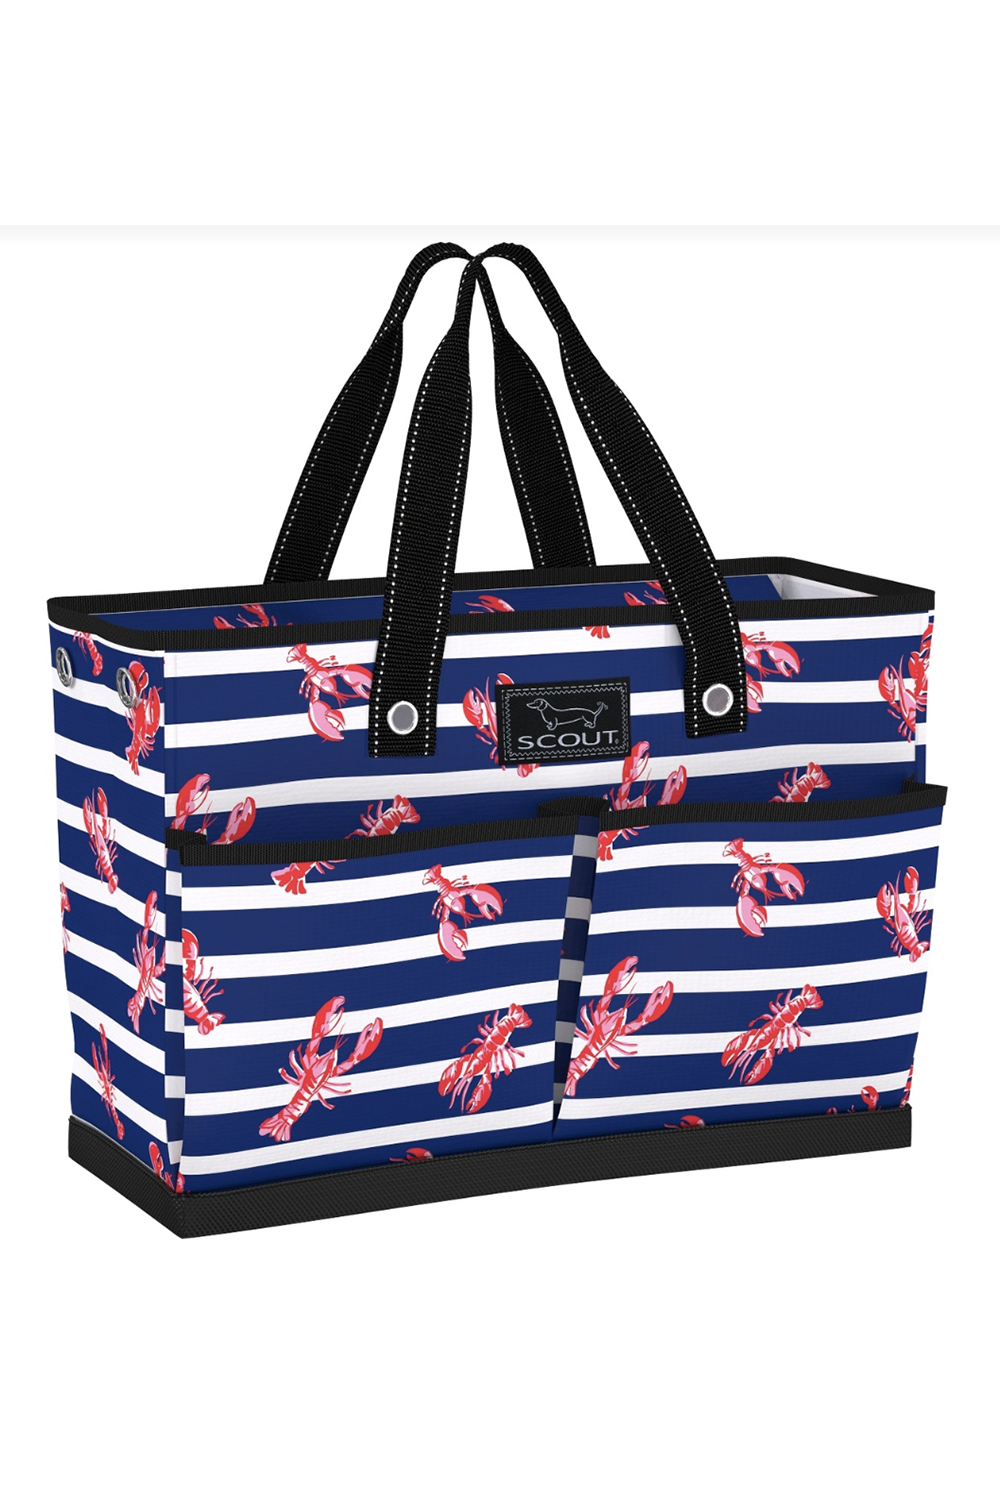 The BJ Tote Bag - "Catch of the Day" SUM24